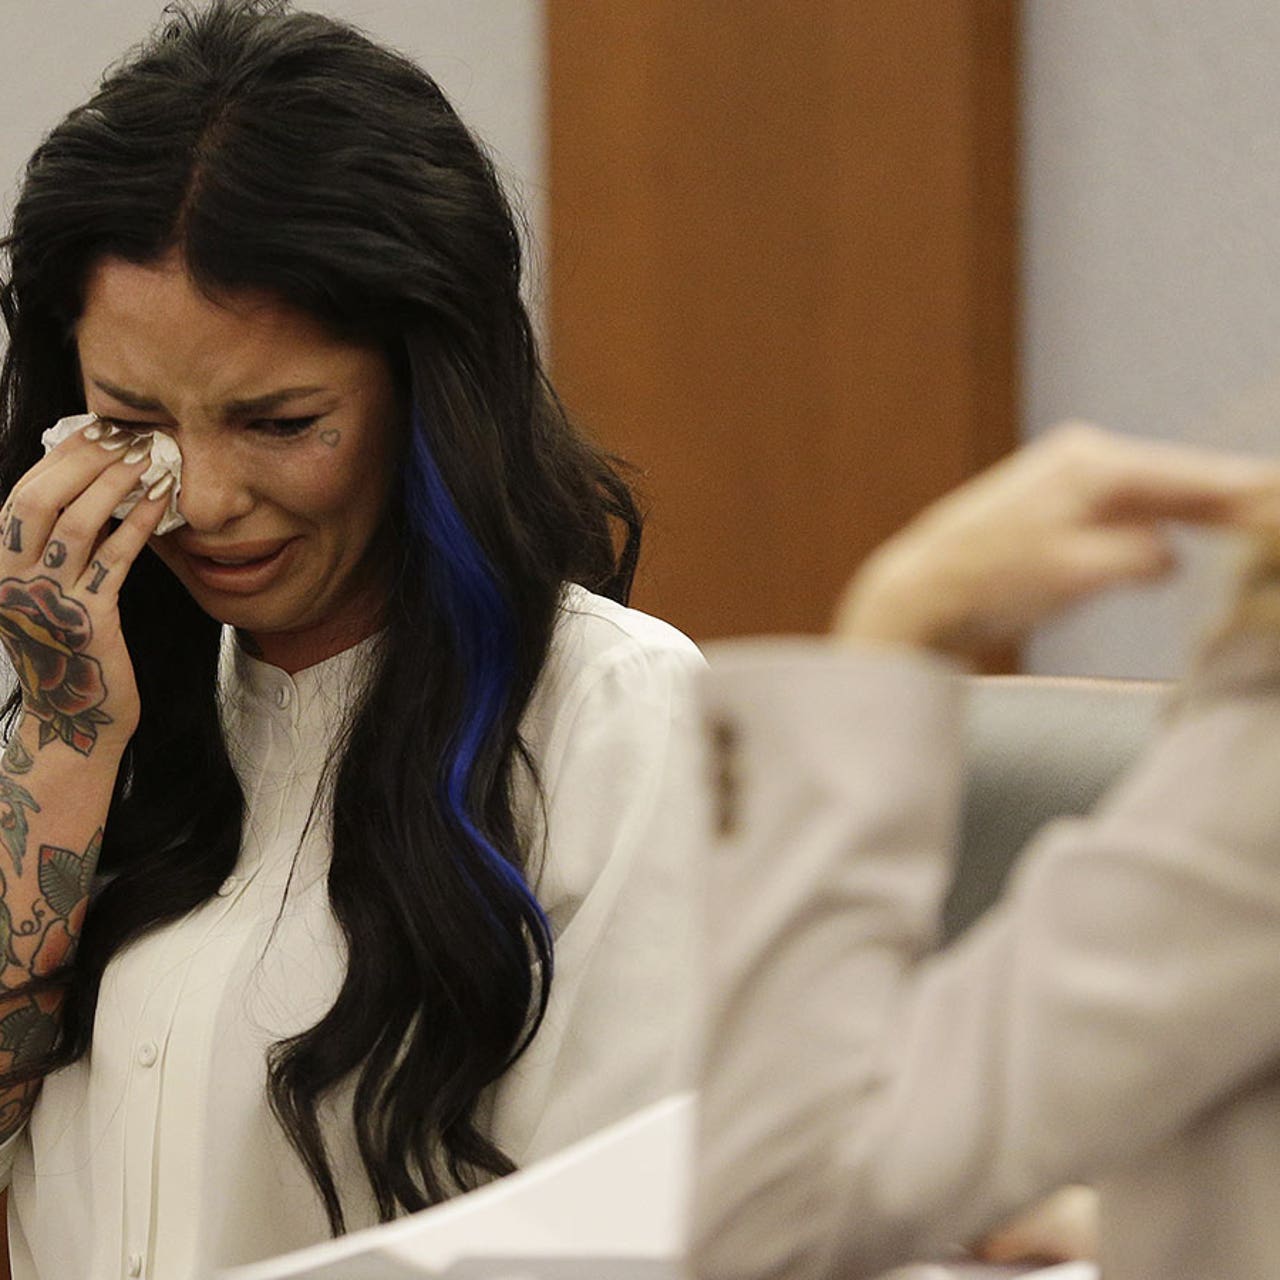 Christine Young - Porn star Christy Mack breaks down while testifying against War Machine |  FOX Sports